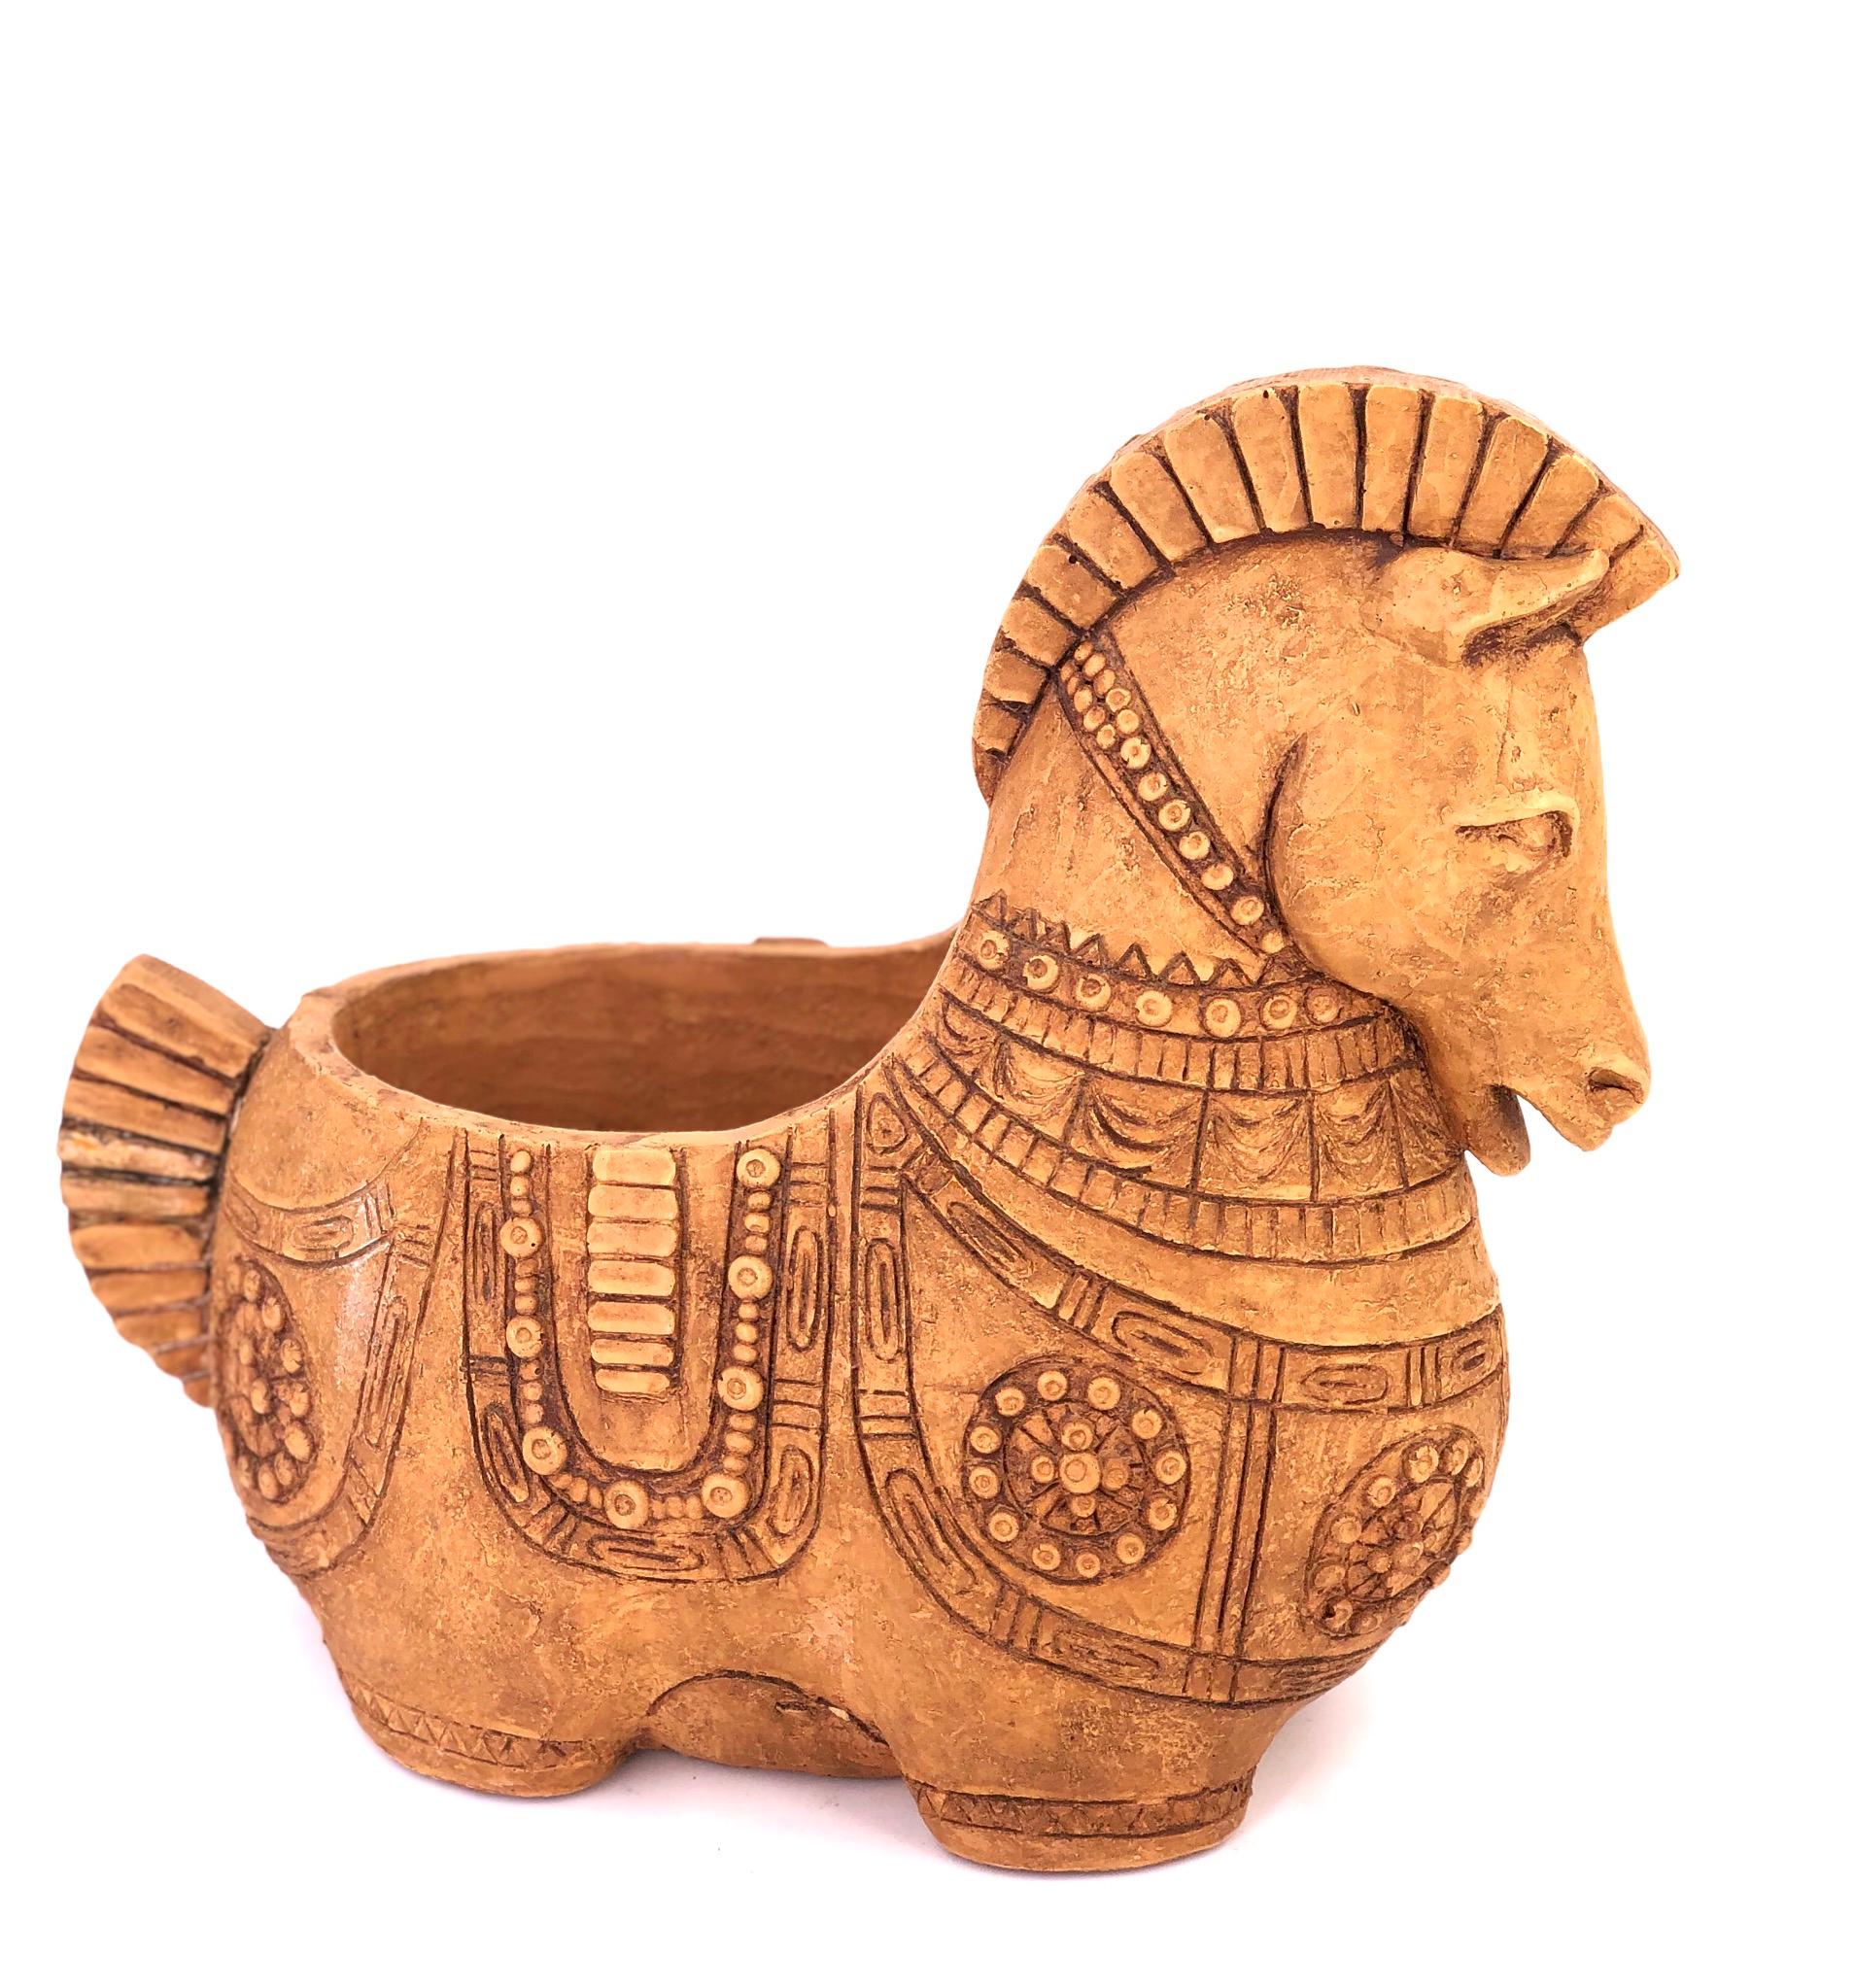 Striking terracotta detailed Trojan style horse sculpture, circa 1970s can be used to put keys matches or a planter well-done piece with some natural finish imperfections.